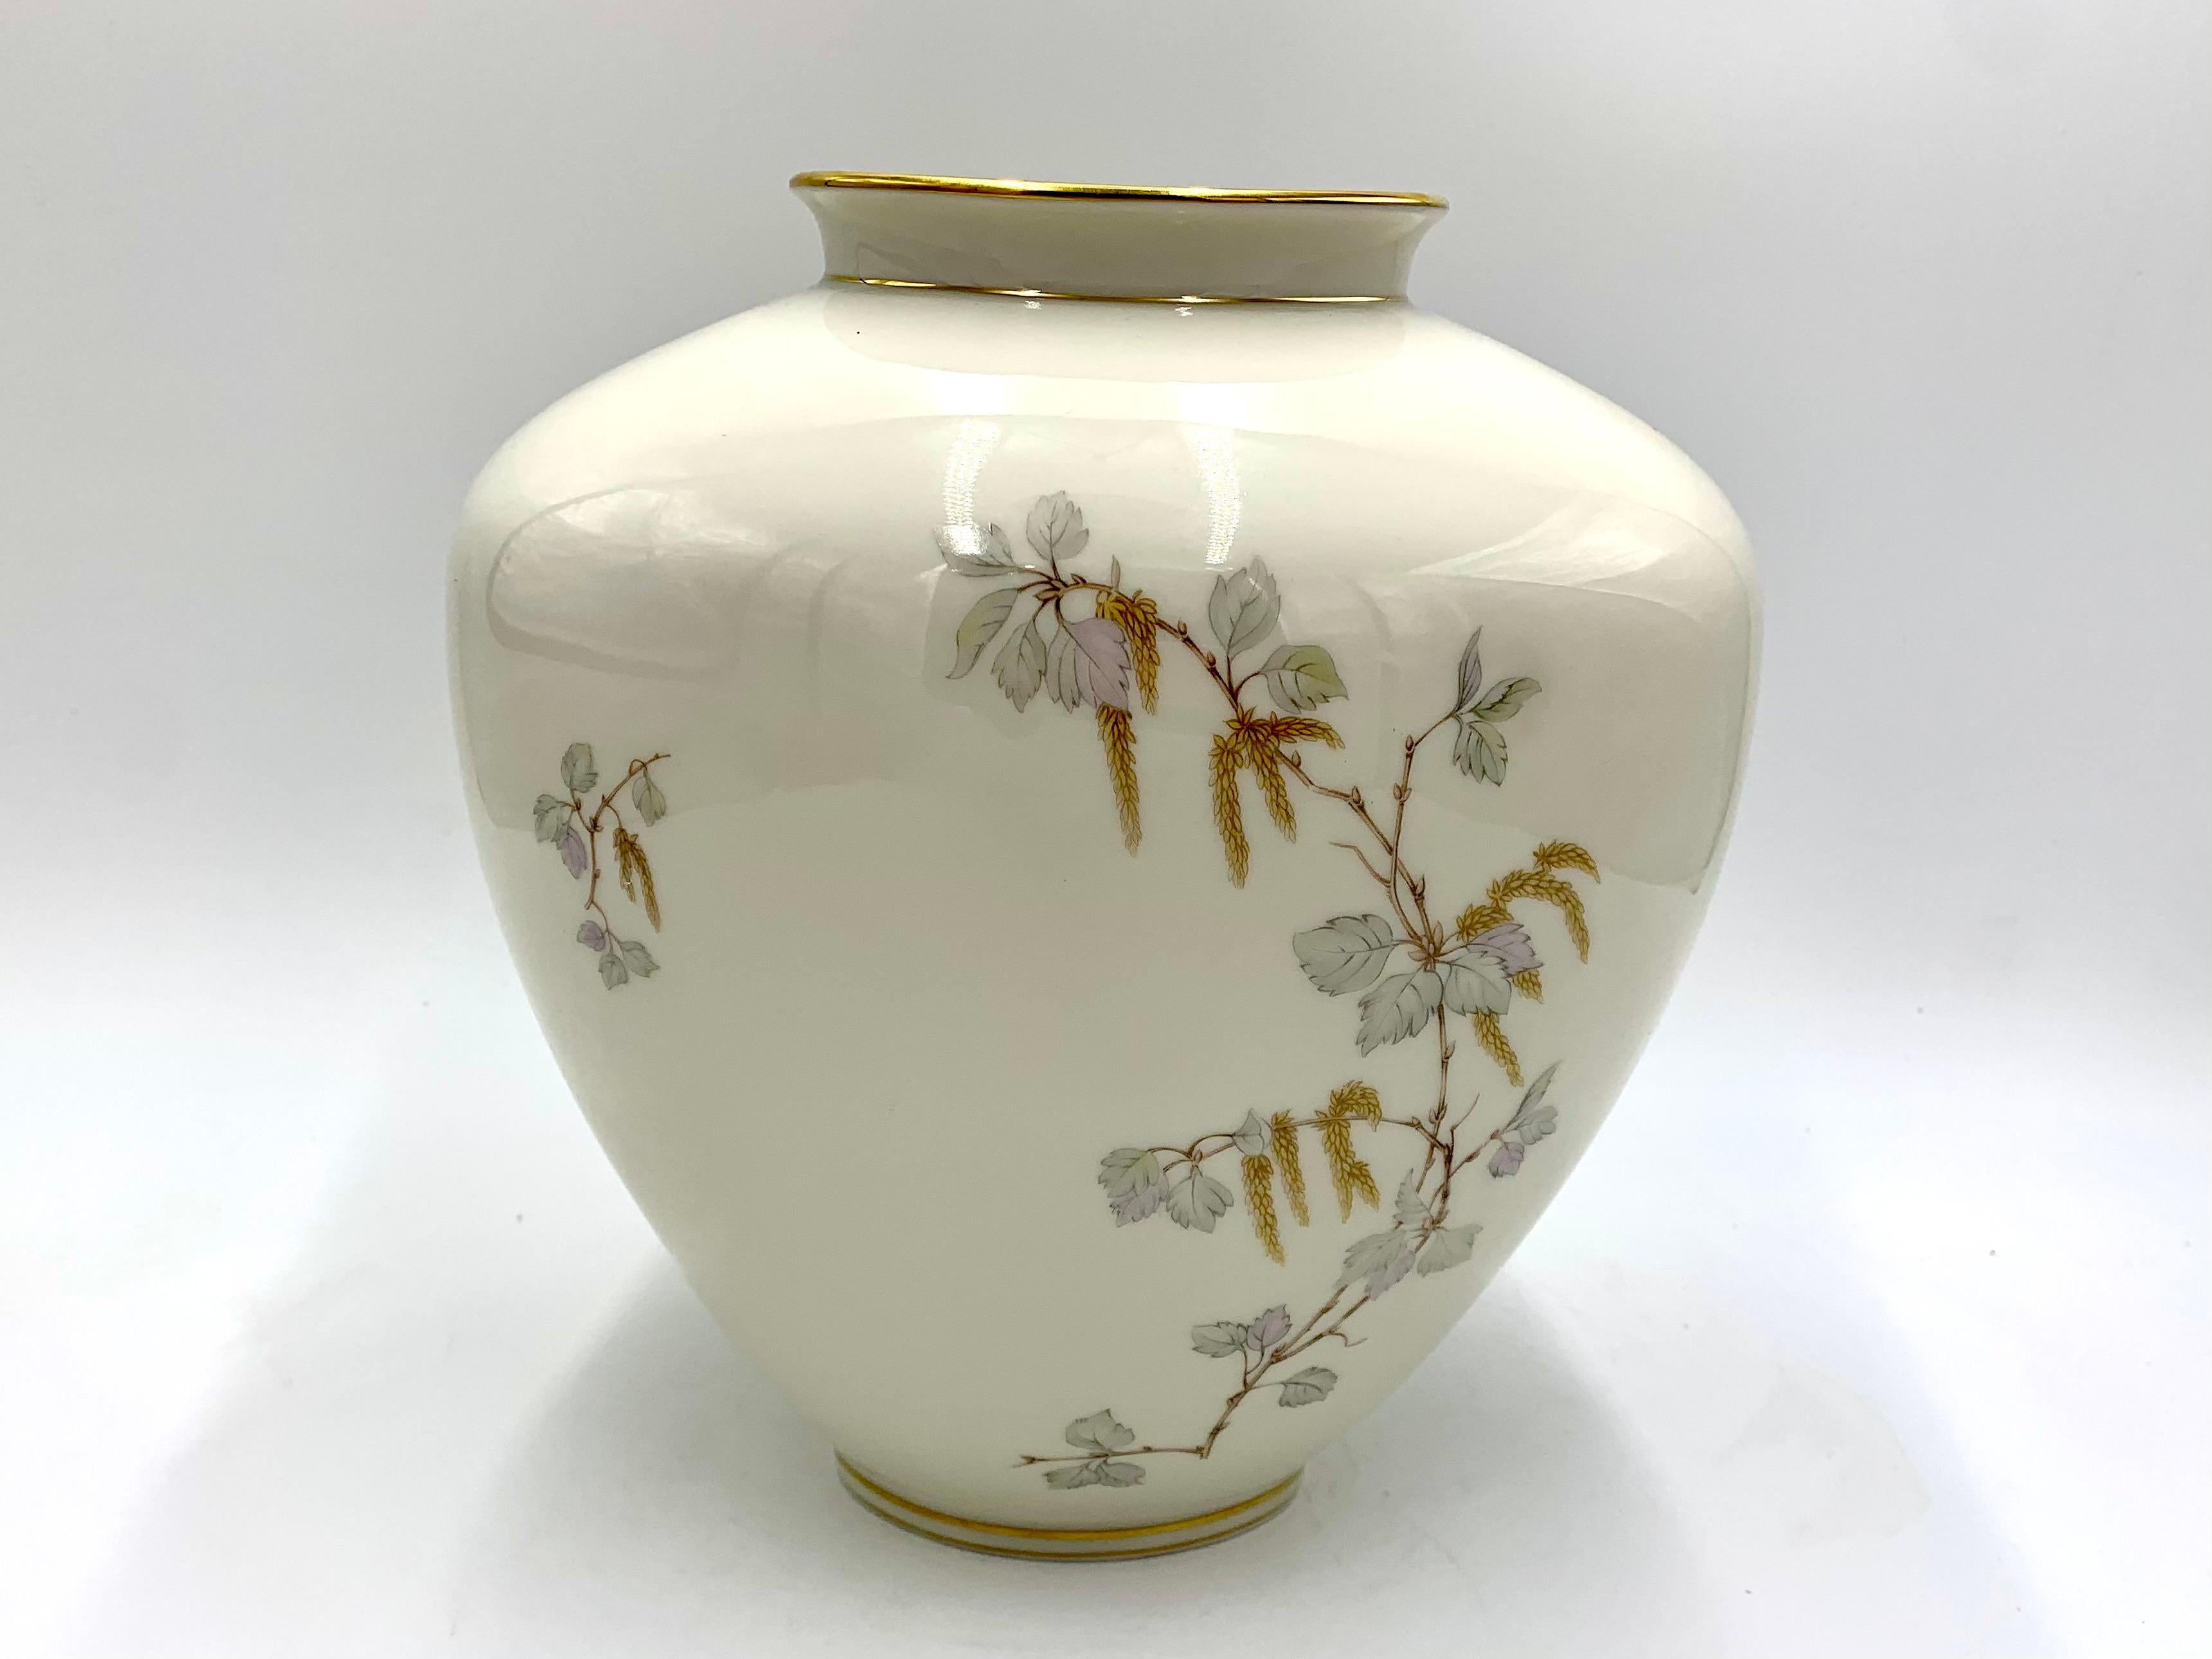 A large porcelain vase with an interesting shape.
Signed Krautheim Selb Bavaria
Produced in the 60s of the last century.
Very good condition, no damage.
Measure: Height 26cm / Width 22cm / Depth 13cm.